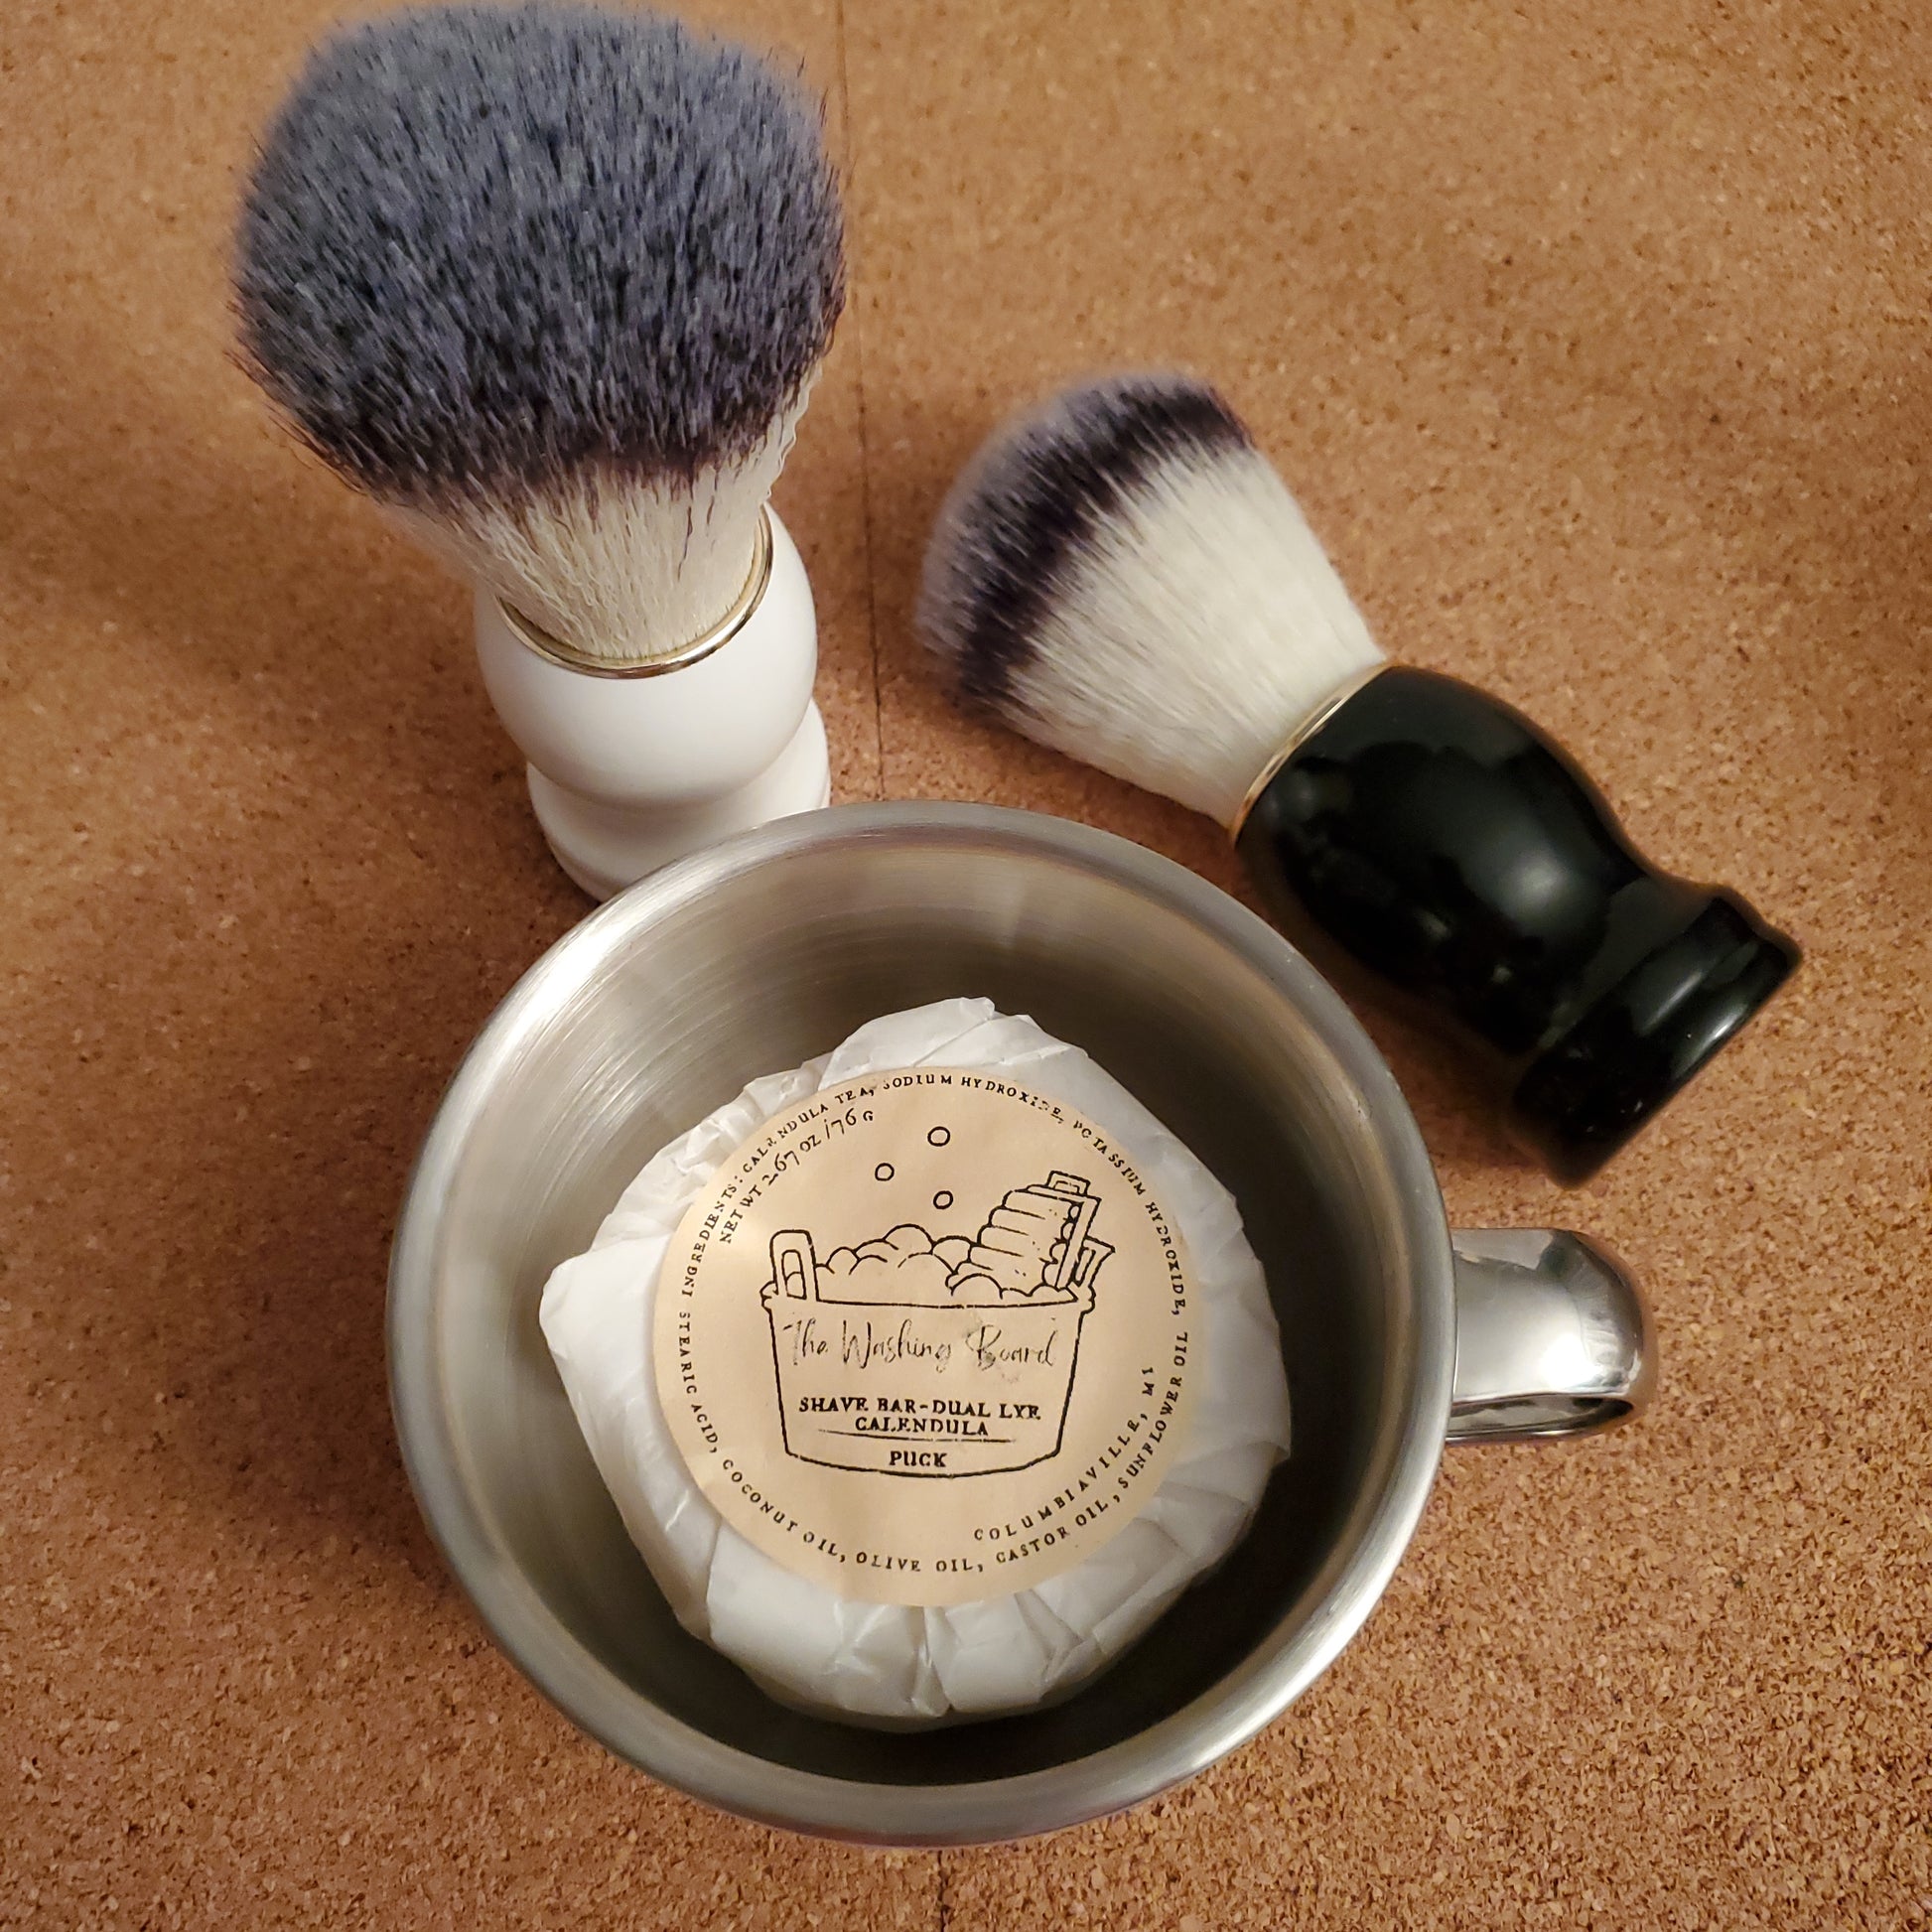 Shaving Kit with Stainless Steel Shaving Bowl,  with both White and Black Brush options and Dual Lye Shaving Soap Puck. 